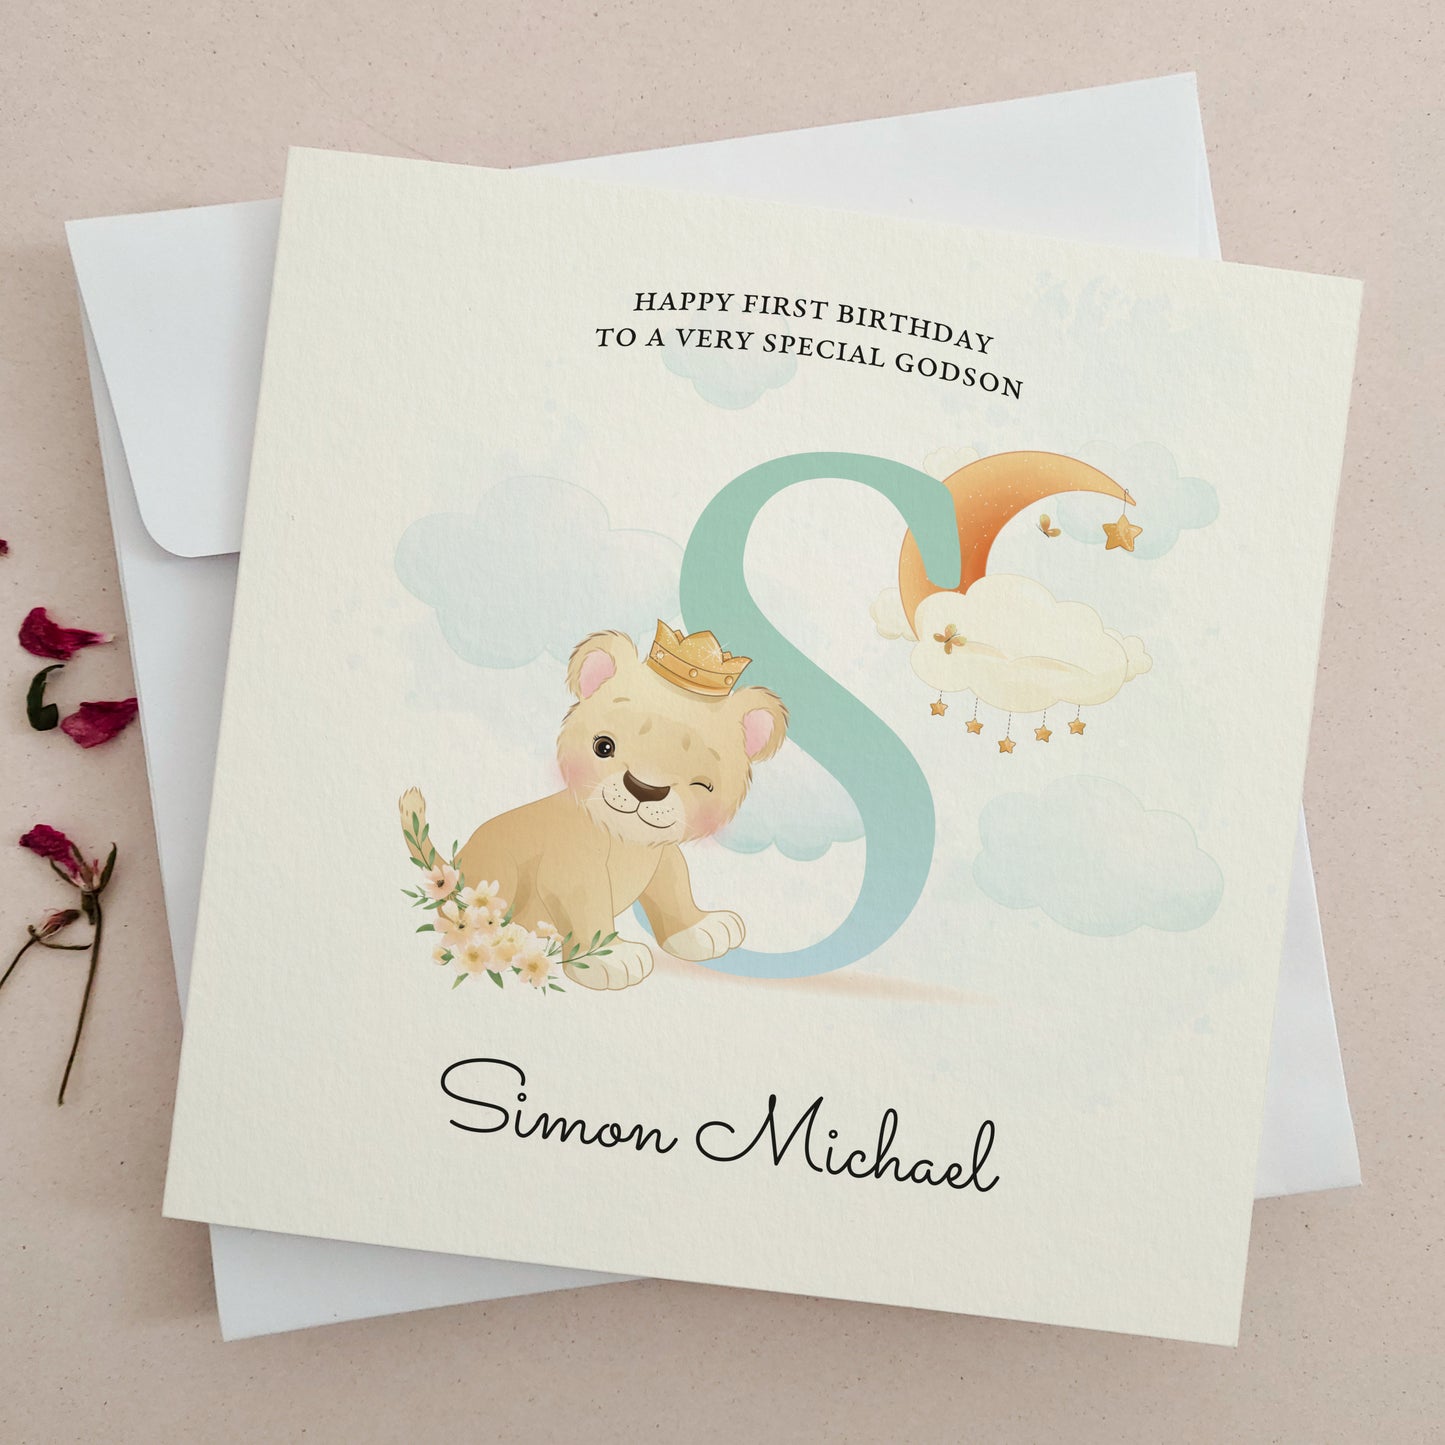 personalized happy first birthday to a very special godson card - XOXOKristen